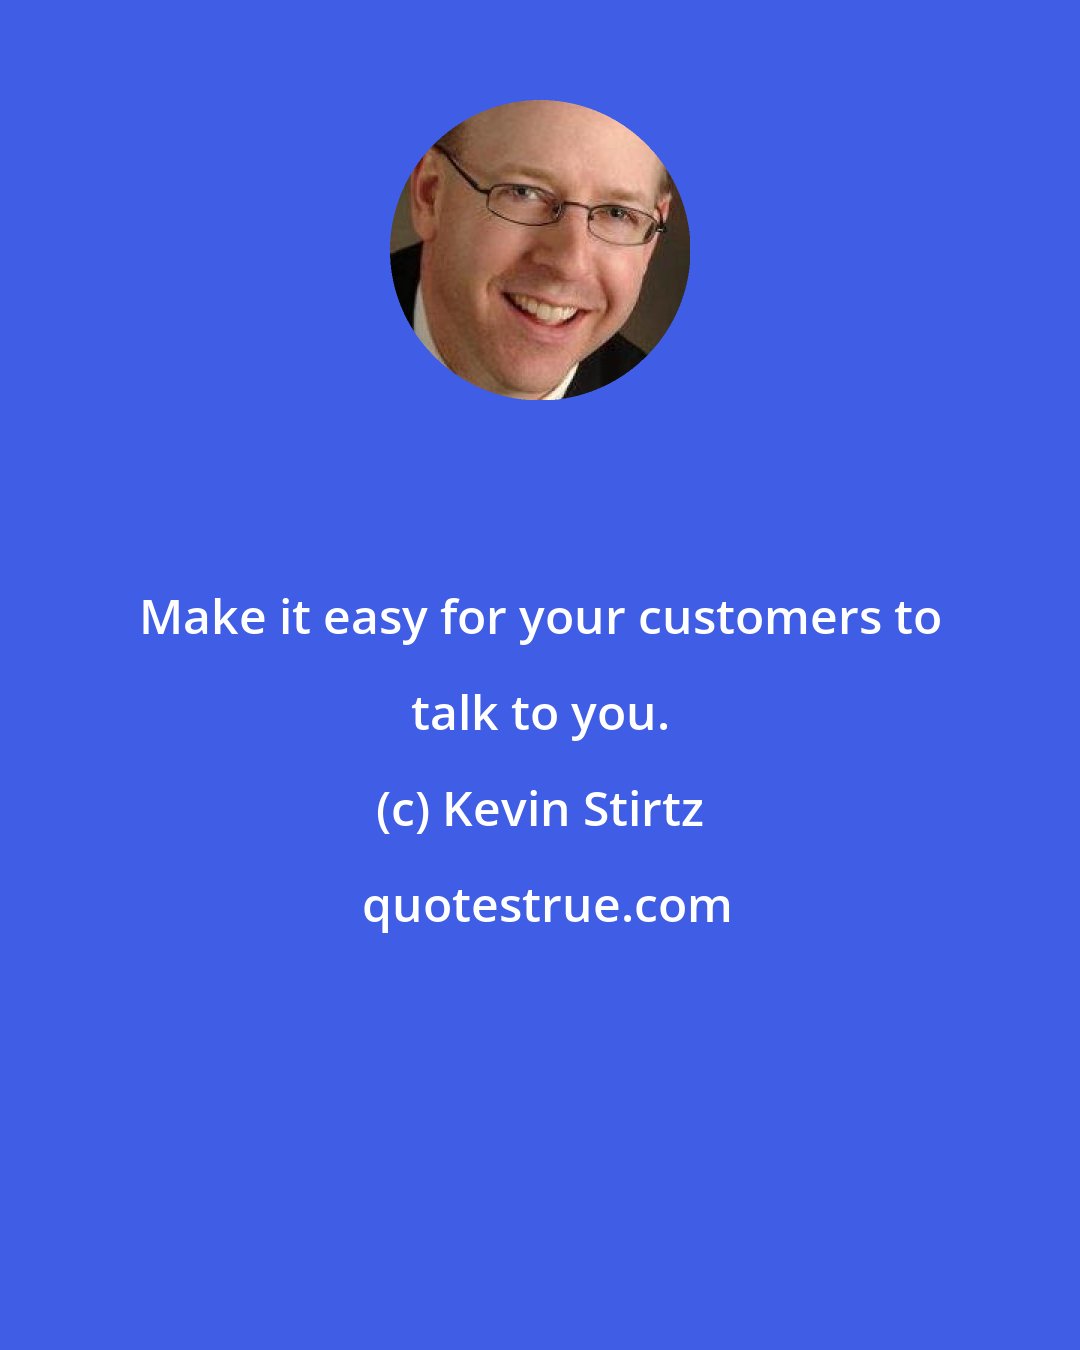 Kevin Stirtz: Make it easy for your customers to talk to you.